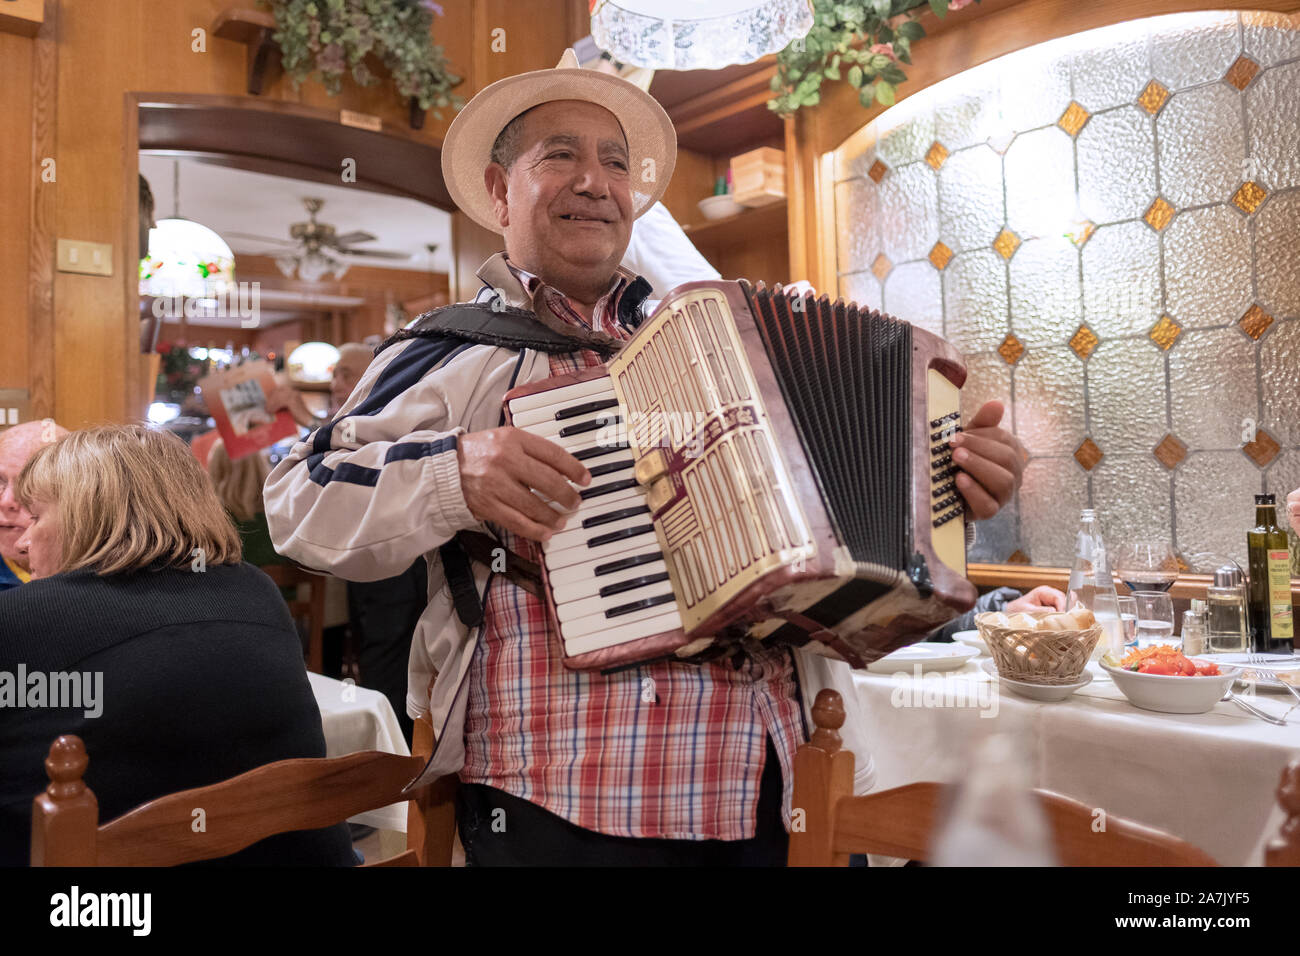 A middle aged singer accordionist in a straw hat performs for tips at a restaurant in Venice, Italy. Stock Photo